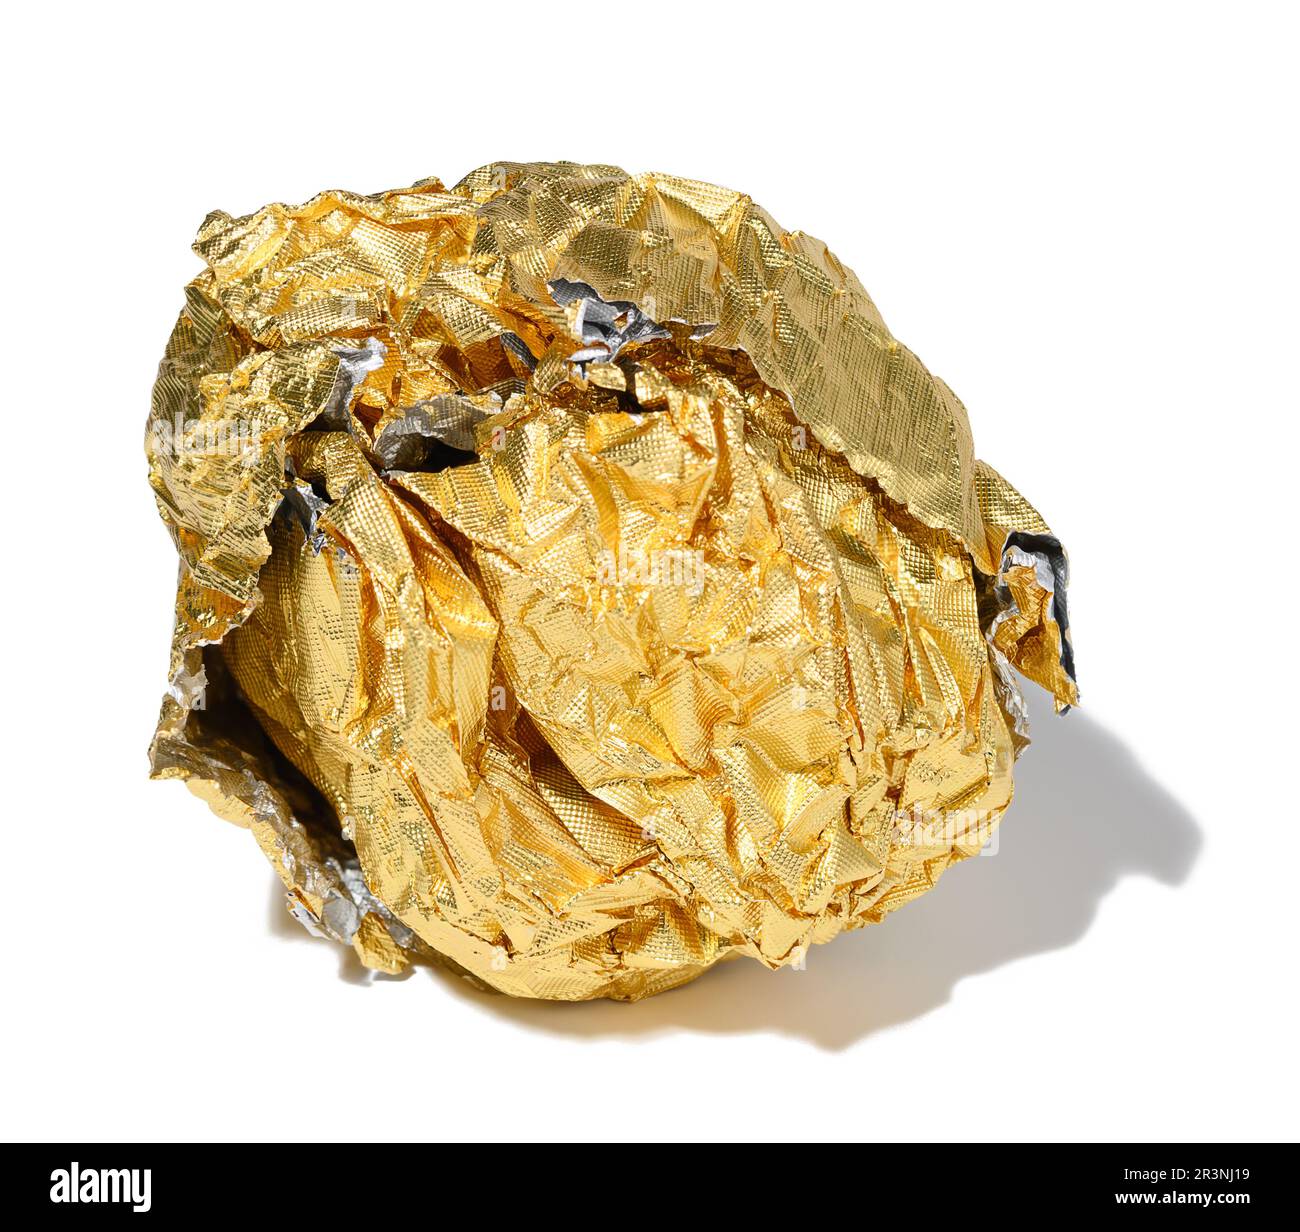 https://c8.alamy.com/comp/2R3NJ19/crumpled-piece-of-golden-foil-with-shadow-on-a-white-isolated-background-2R3NJ19.jpg